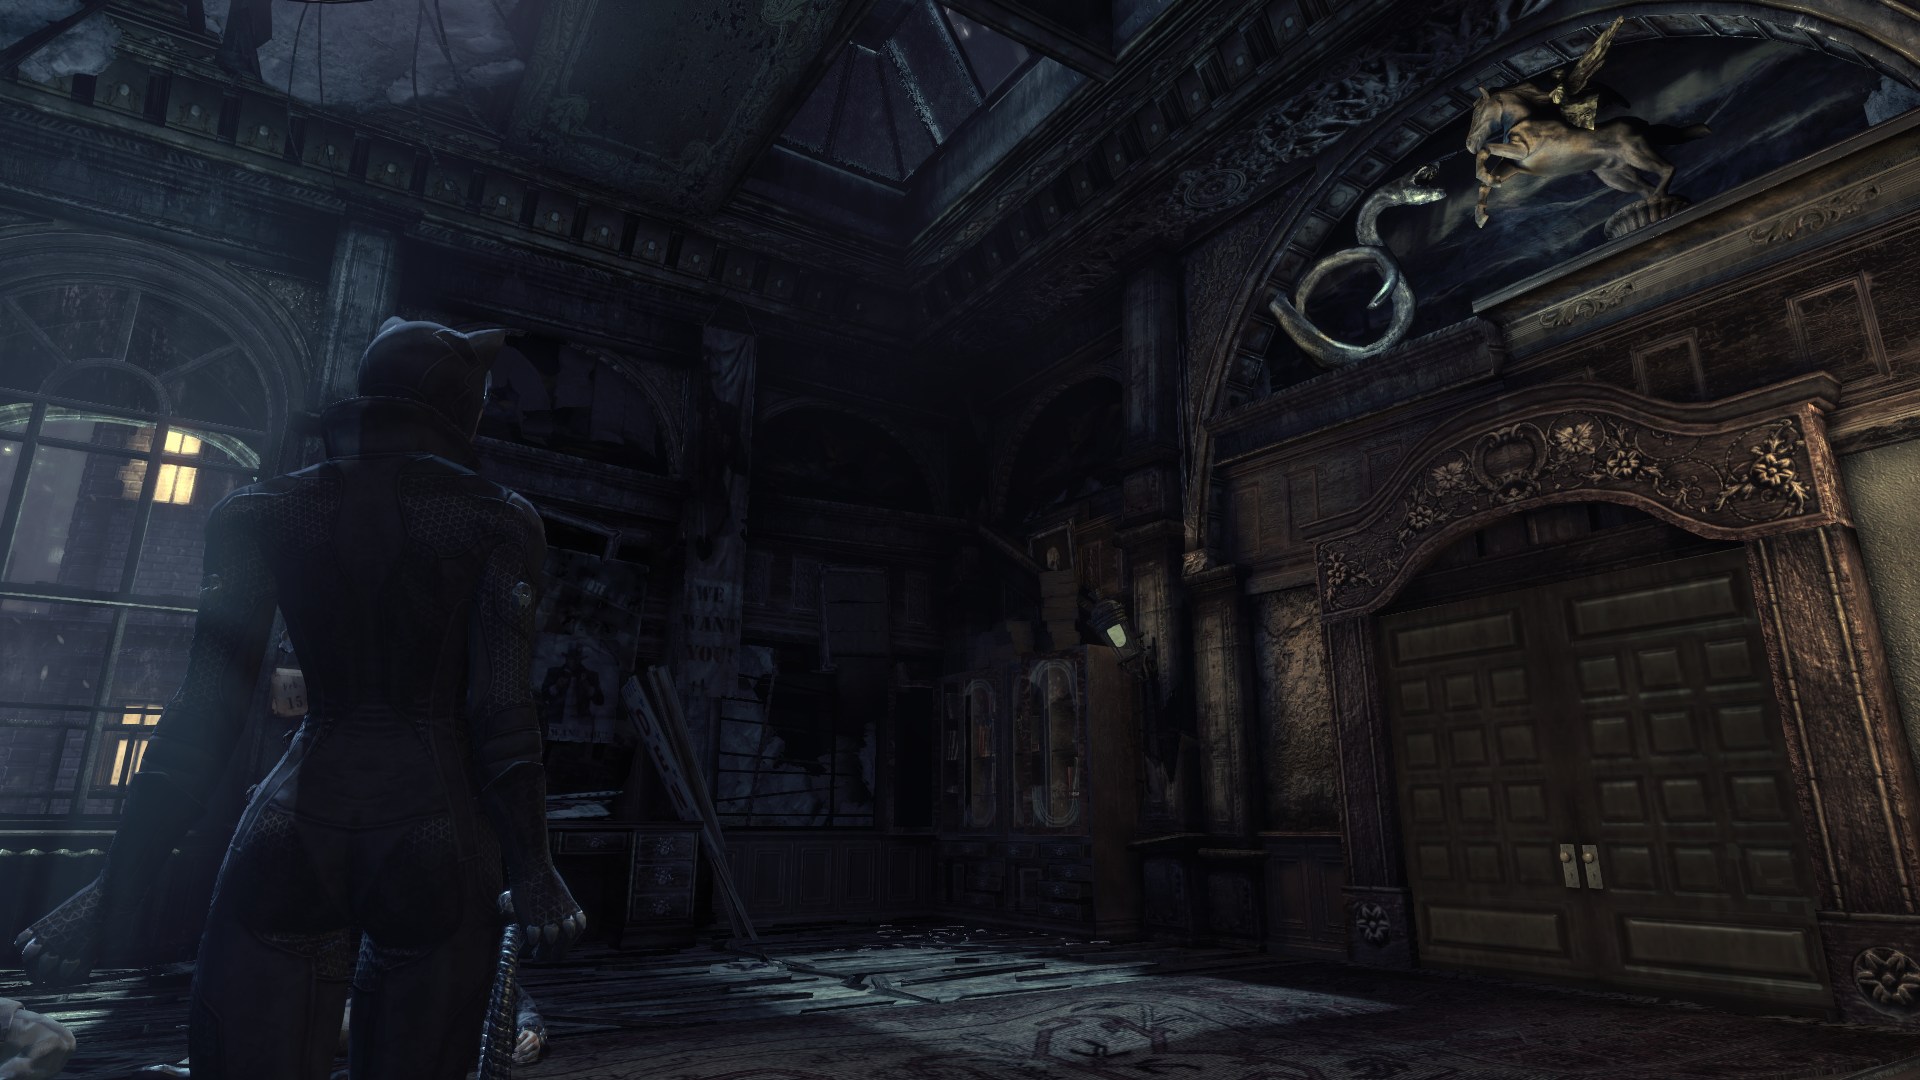 Batman: Arkham City DX11 Patch Is Officially Out Now